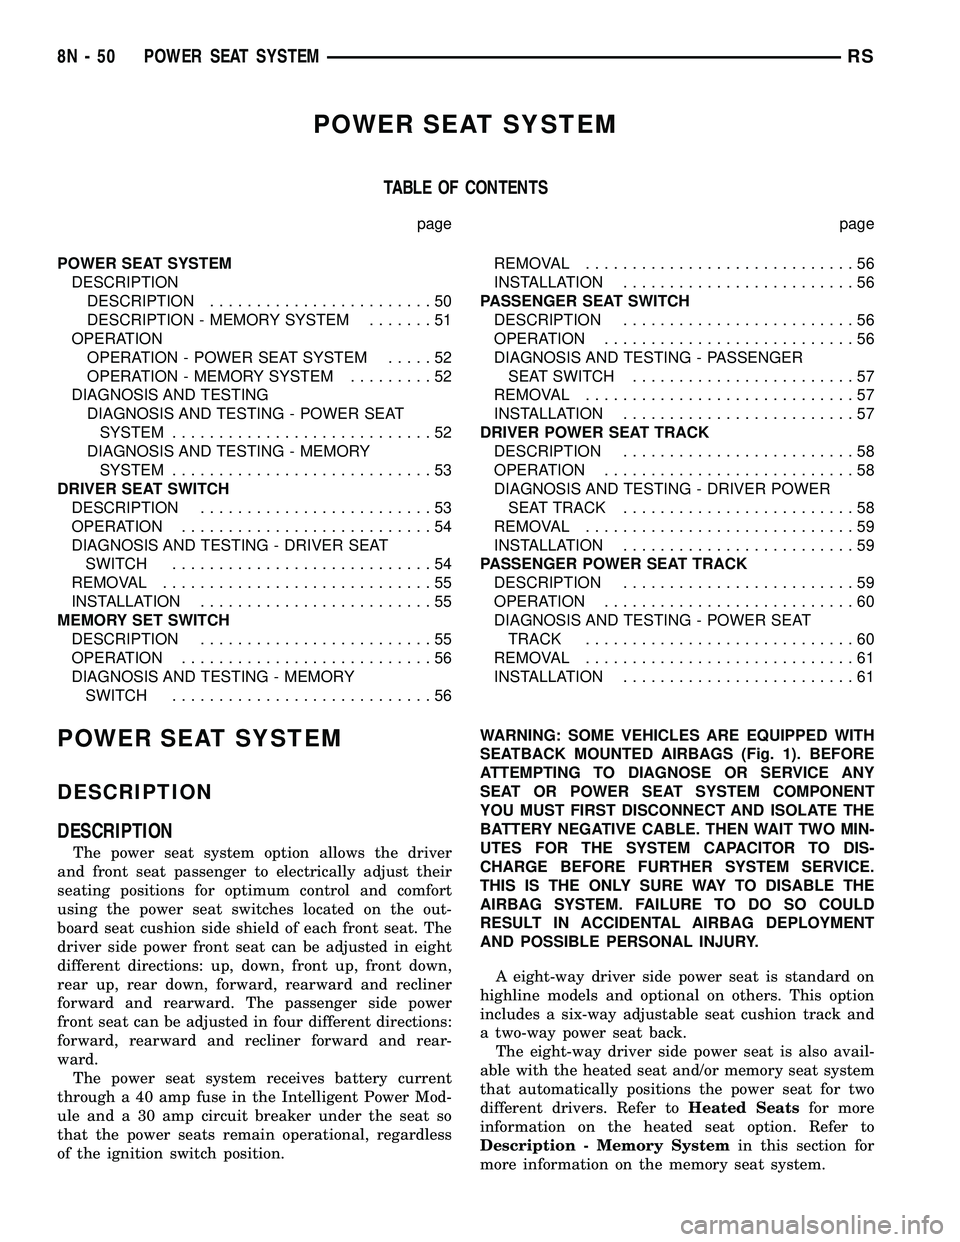 CHRYSLER VOYAGER 2004  Service Manual POWER SEAT SYSTEM
TABLE OF CONTENTS
page page
POWER SEAT SYSTEM
DESCRIPTION
DESCRIPTION........................50
DESCRIPTION - MEMORY SYSTEM.......51
OPERATION
OPERATION - POWER SEAT SYSTEM.....52
OP